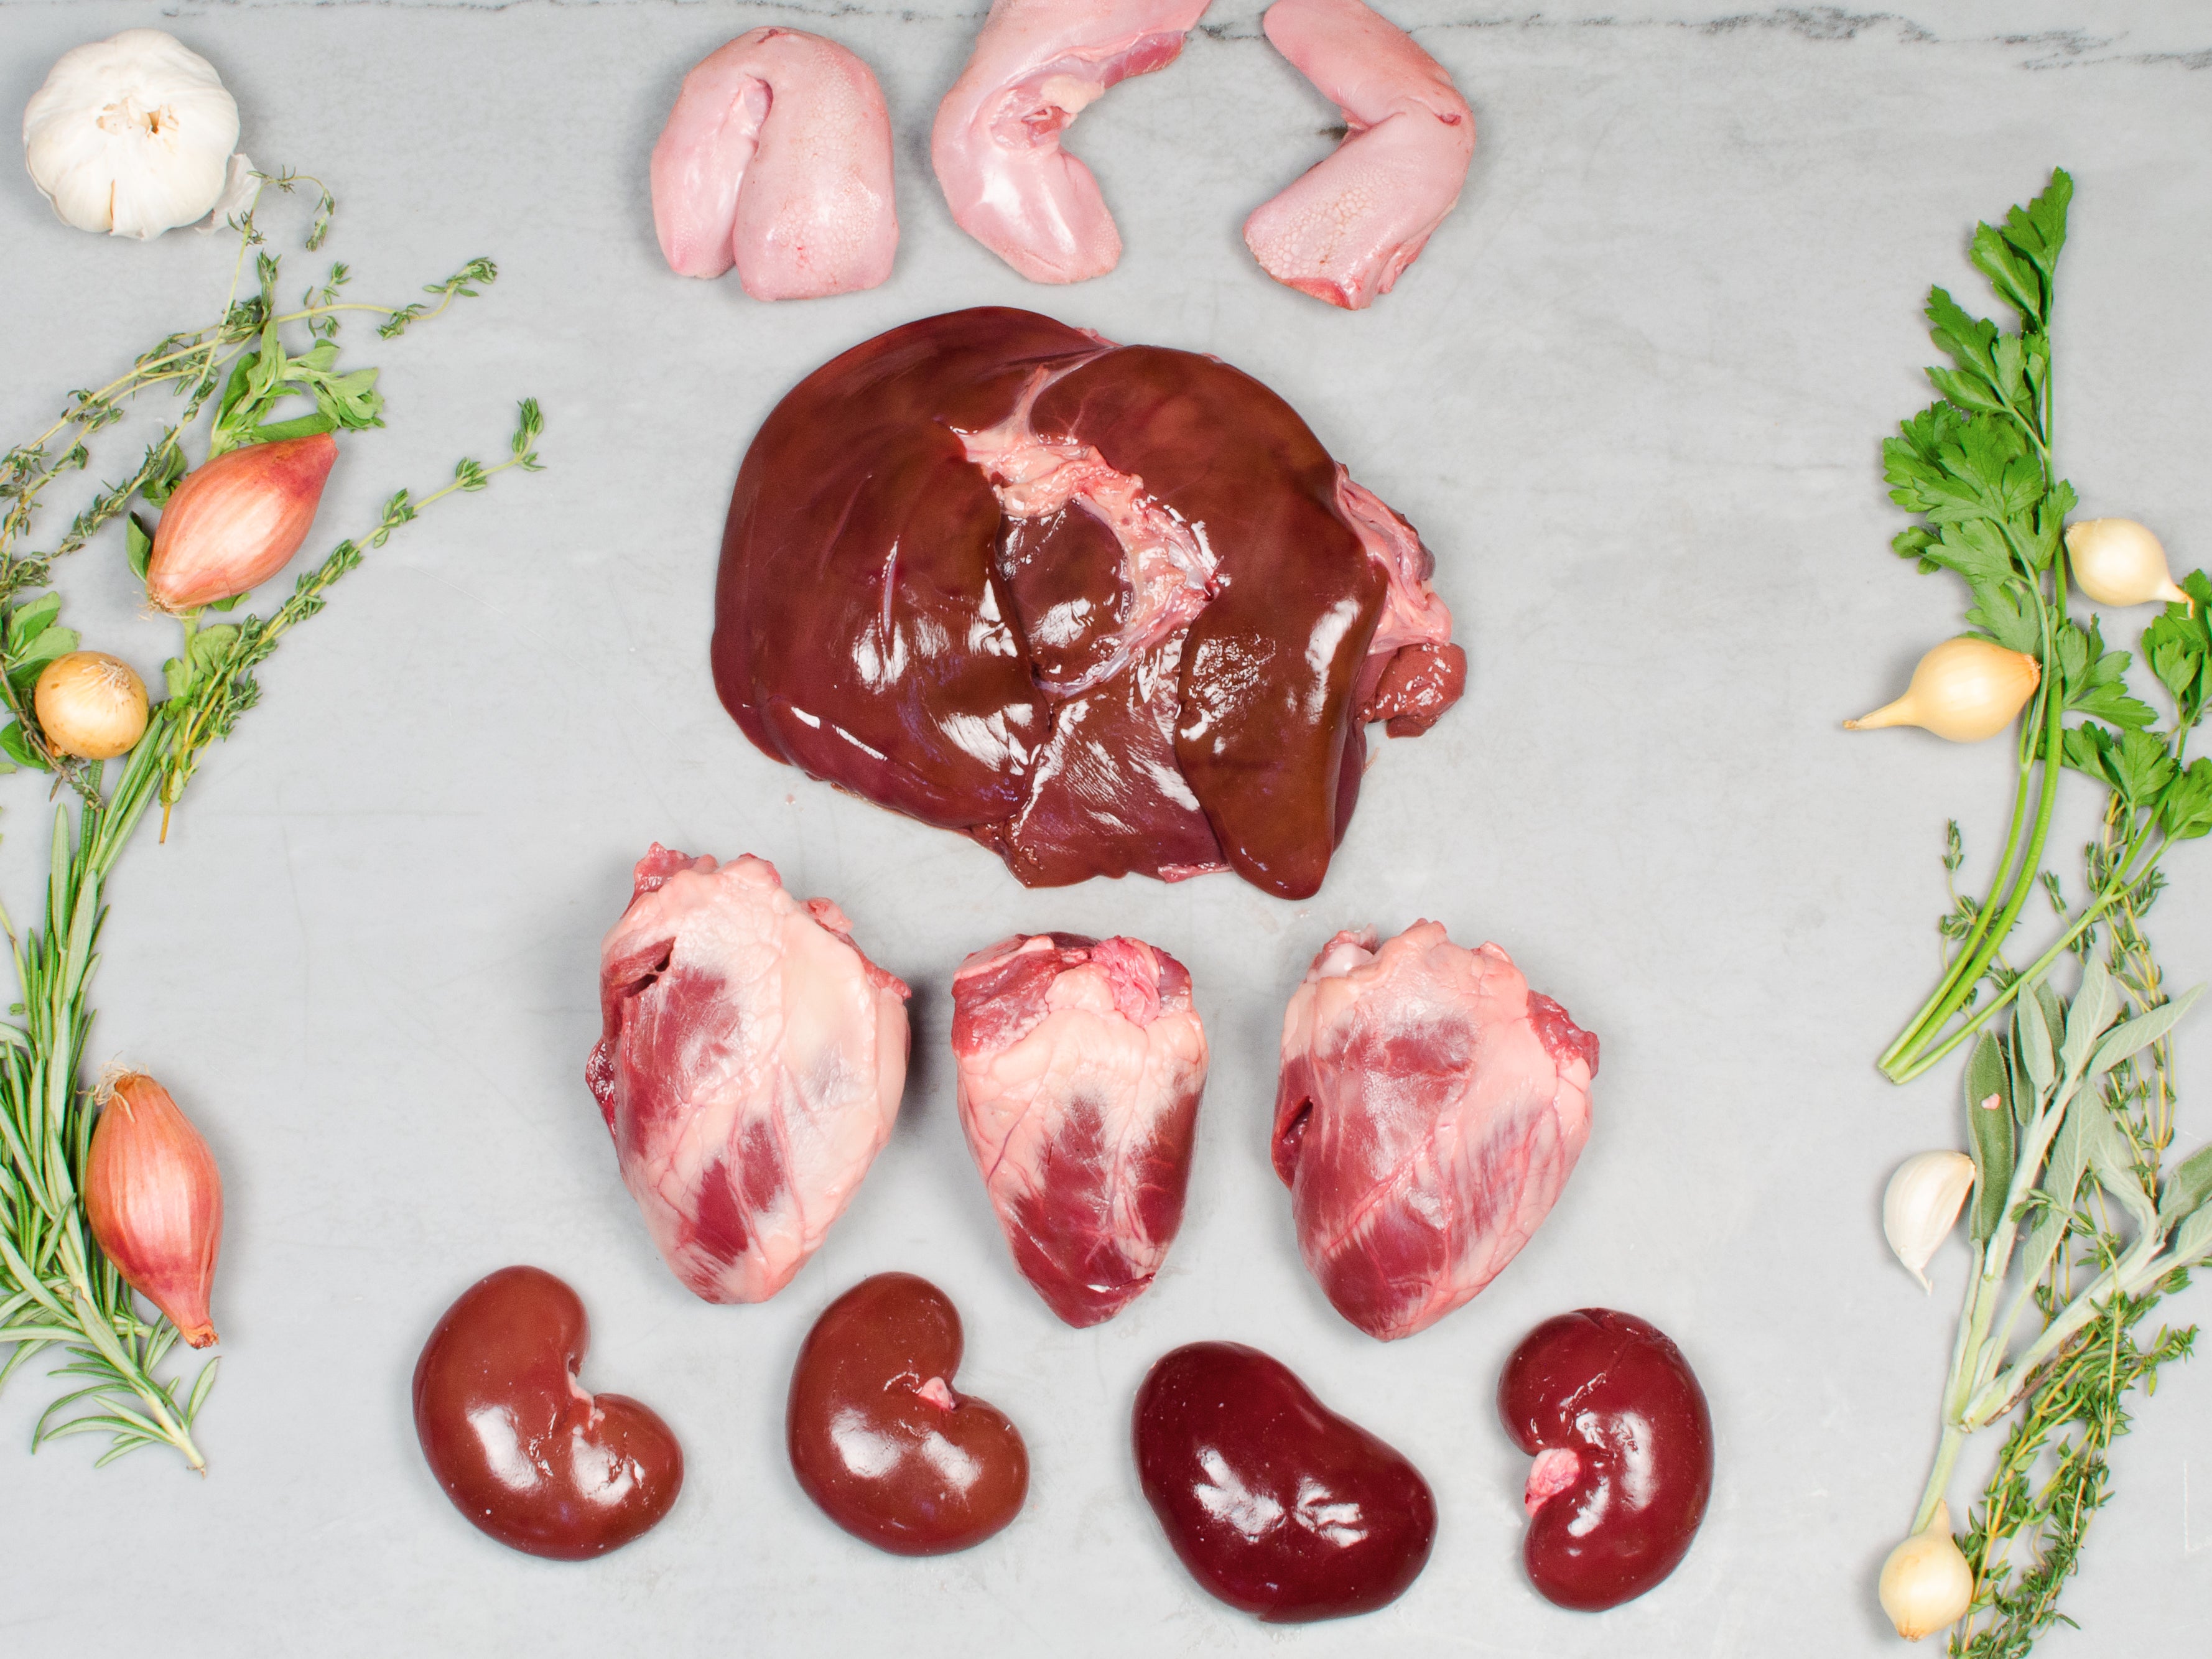 Heritage Breed Goat Offal